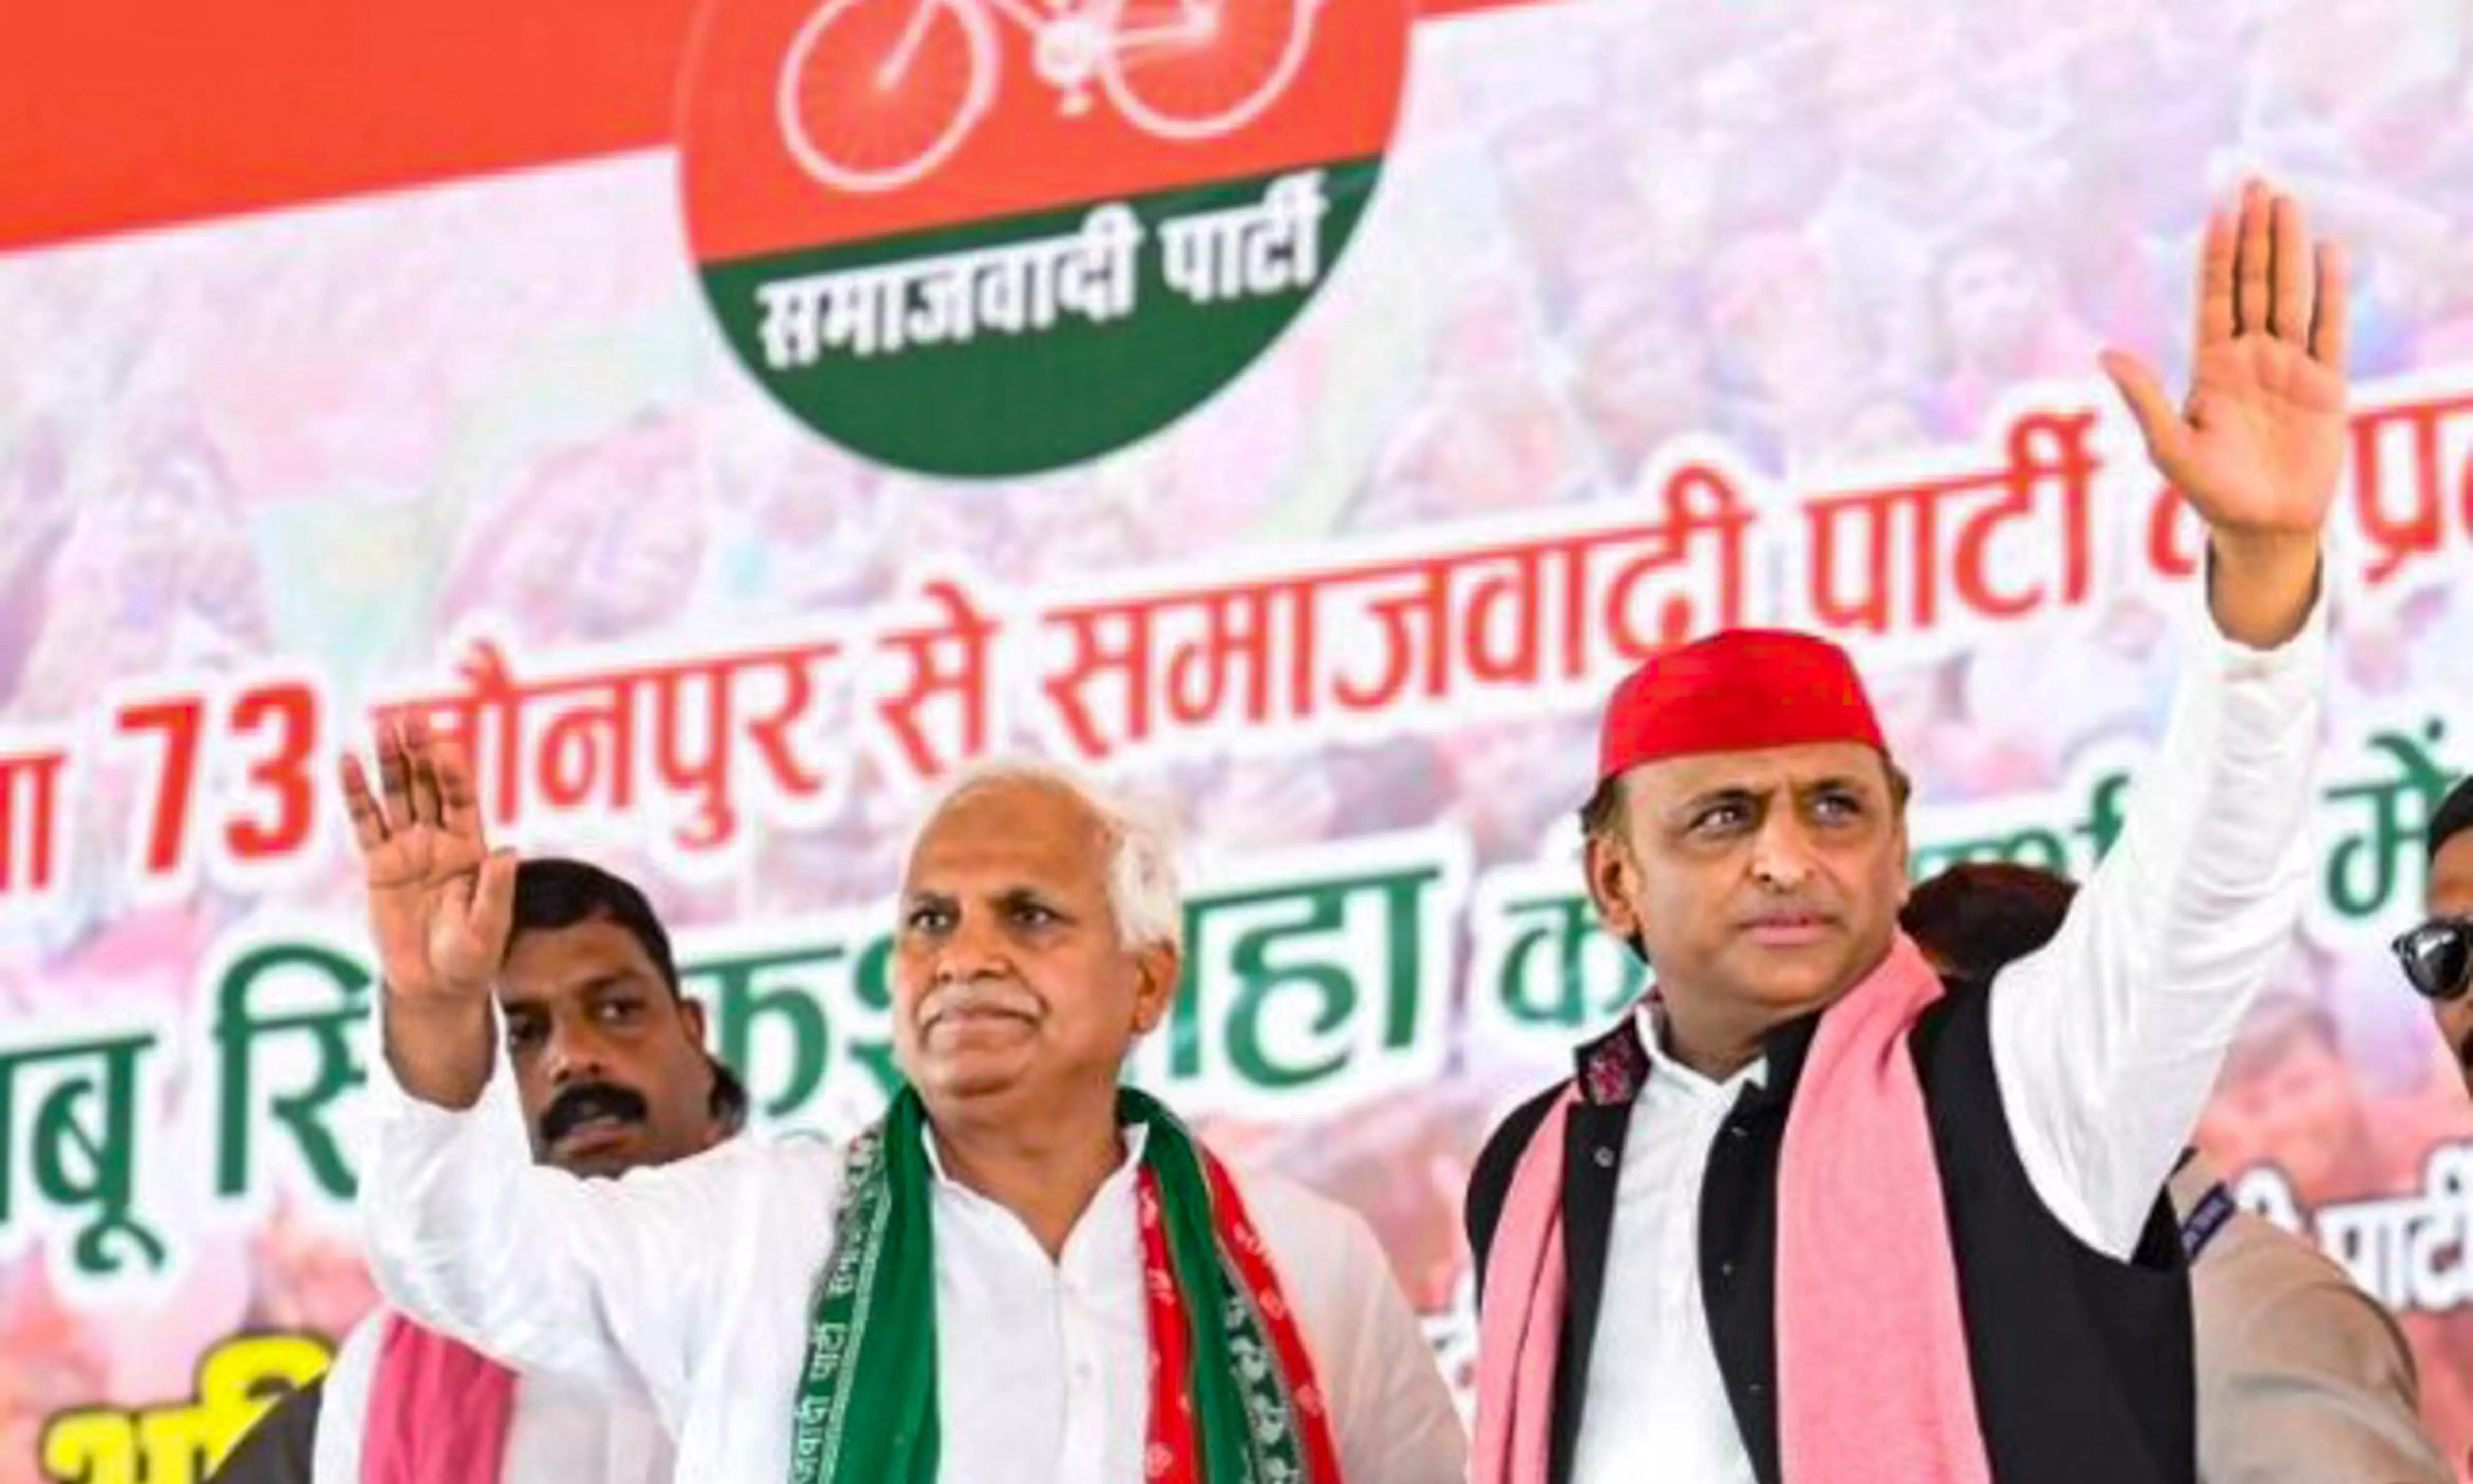 INDIA bloc will win all 27 UP seats in 6th and 7th phase of LS polls: Akhilesh Yadav